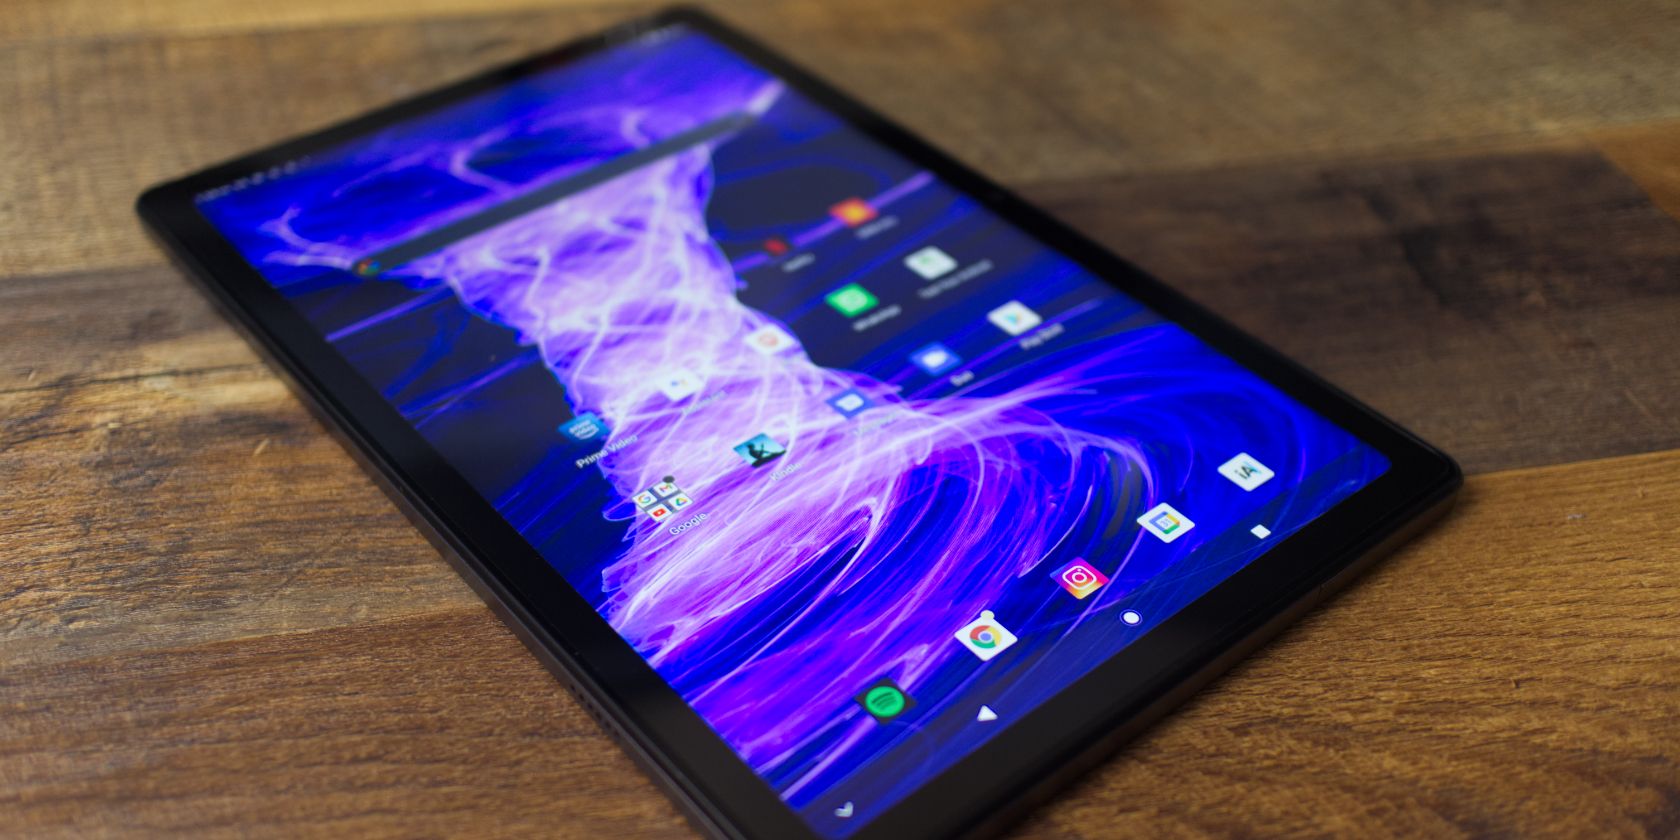 Teclast T40 HD tablet review – The budget tablet with lots of fast